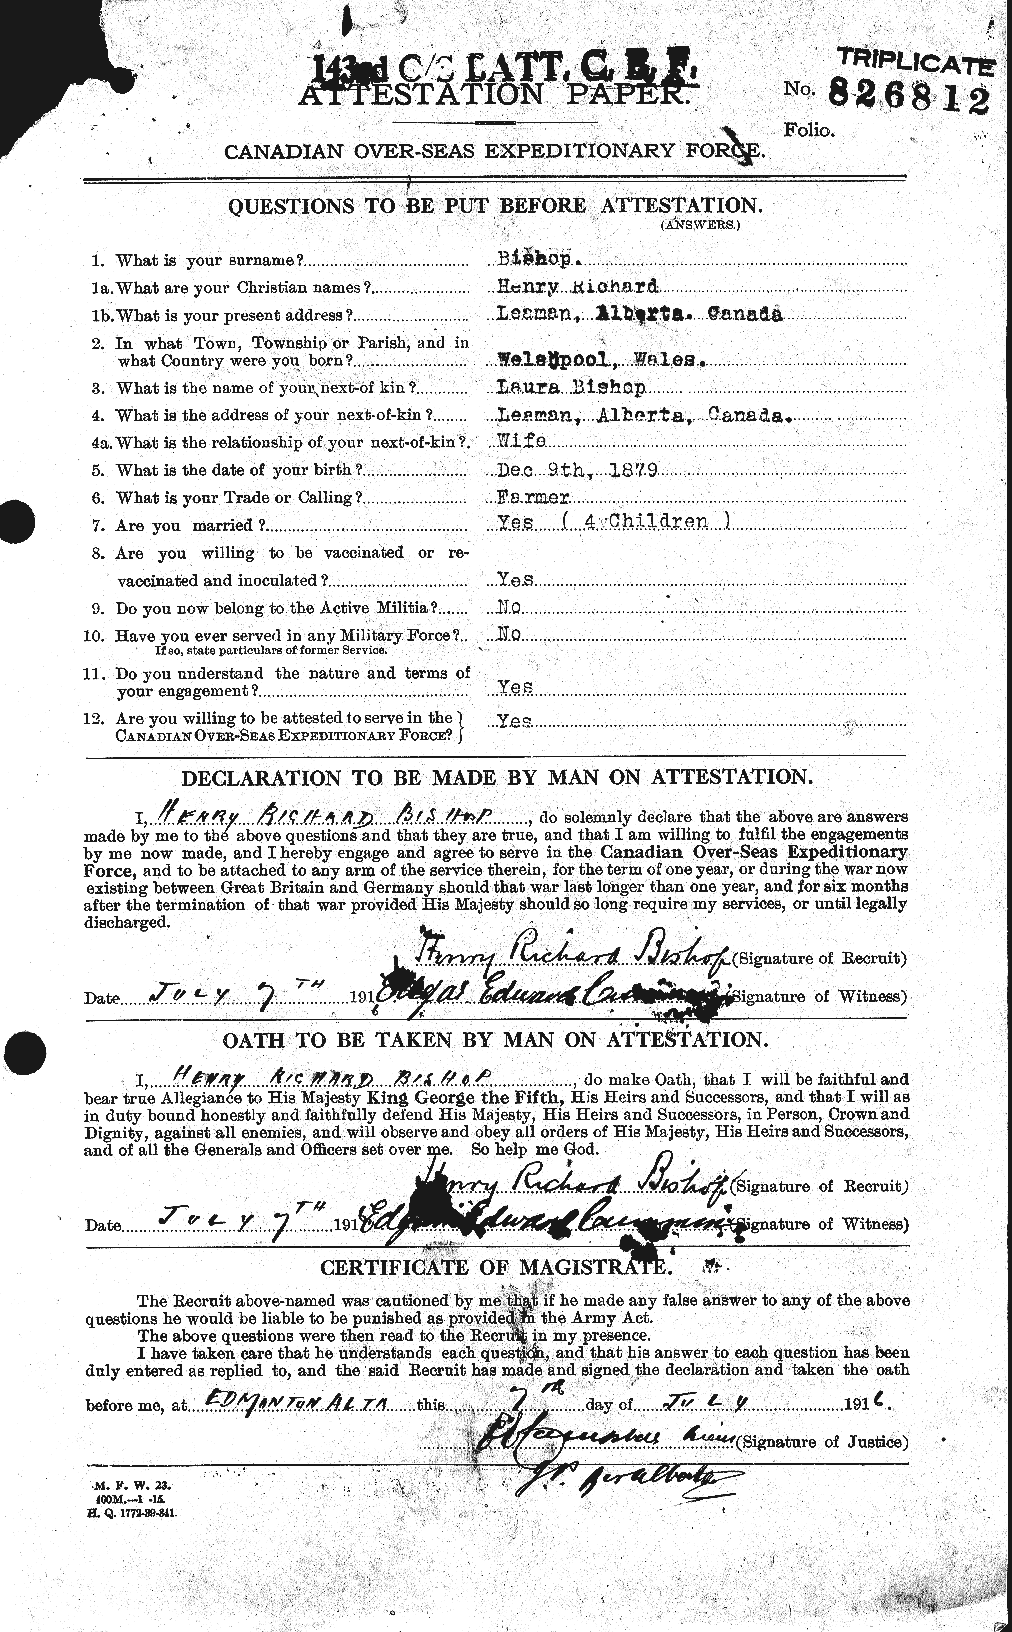 Personnel Records of the First World War - CEF 244322a